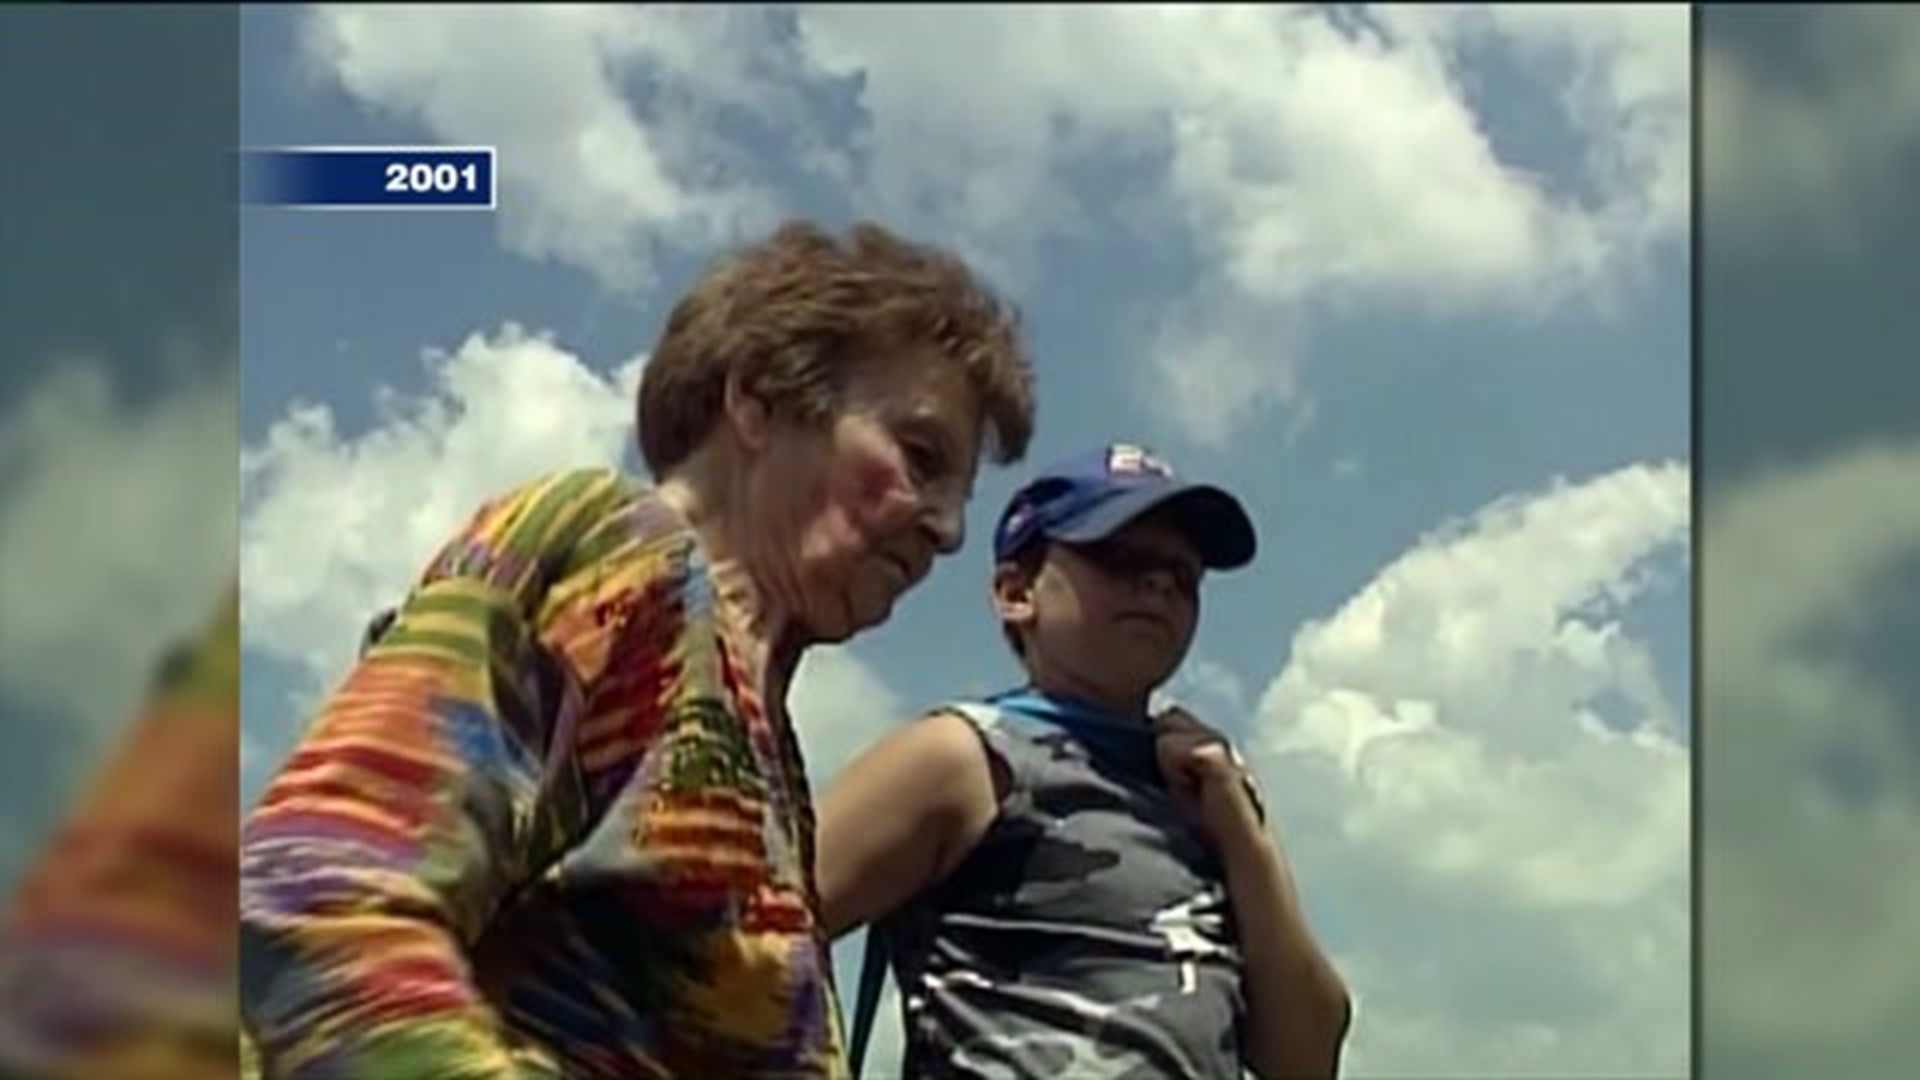 Video Vault: Summer Fun for the Elderly at Camp St. Andrew